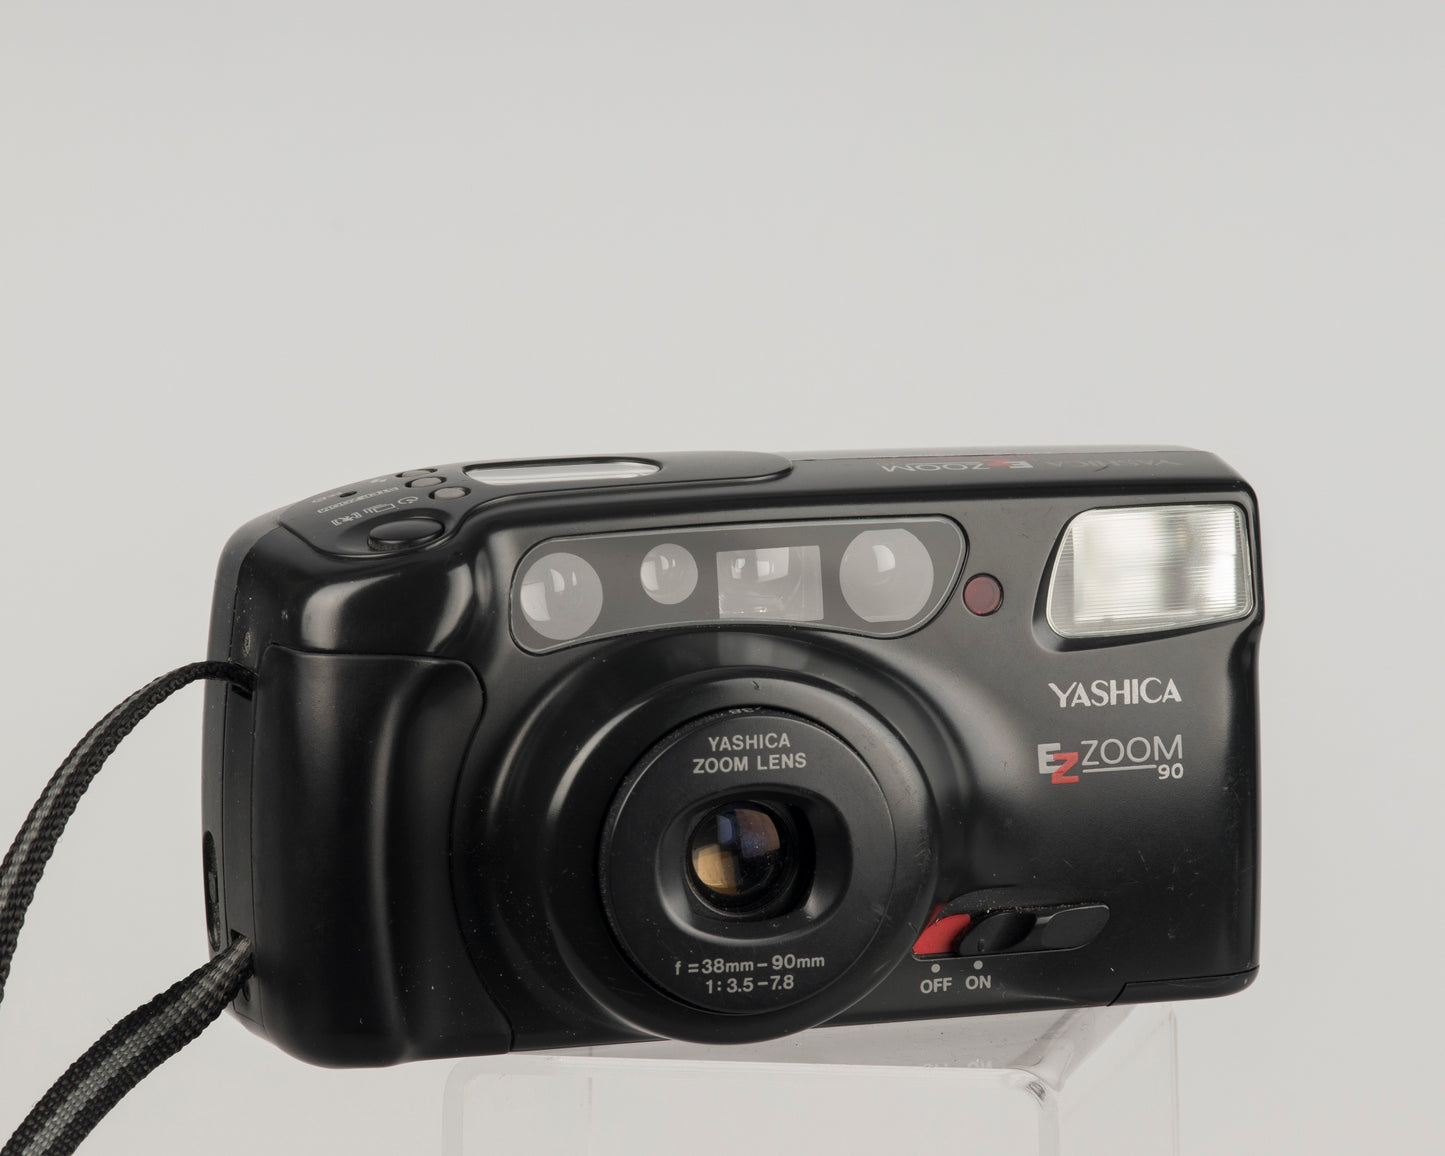 The Yashica EZ Zoom 90 (aka Zoomtec 90) is a high quality 35mm point and shoot made by Kyocera in the early 90s.